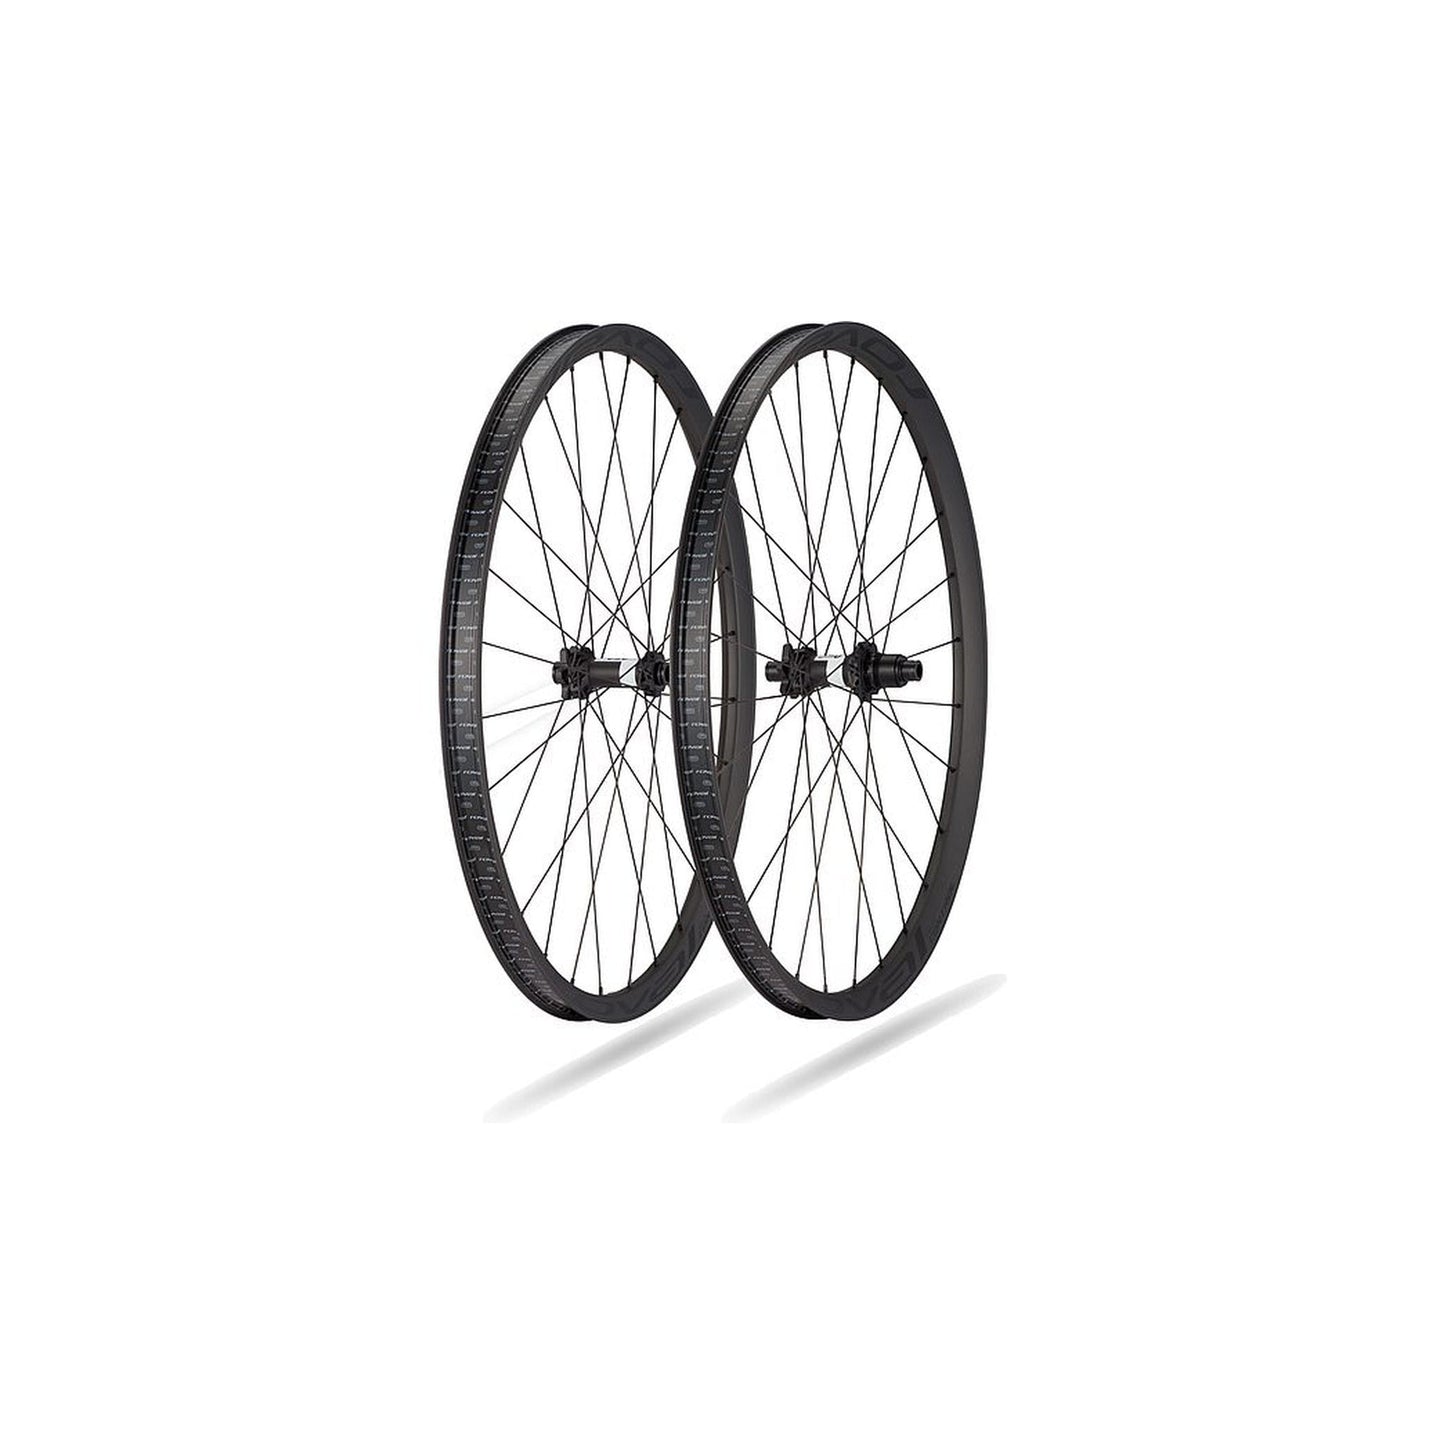 Roval Control 29 Carbon 6B XD-Cycles Direct Specialized